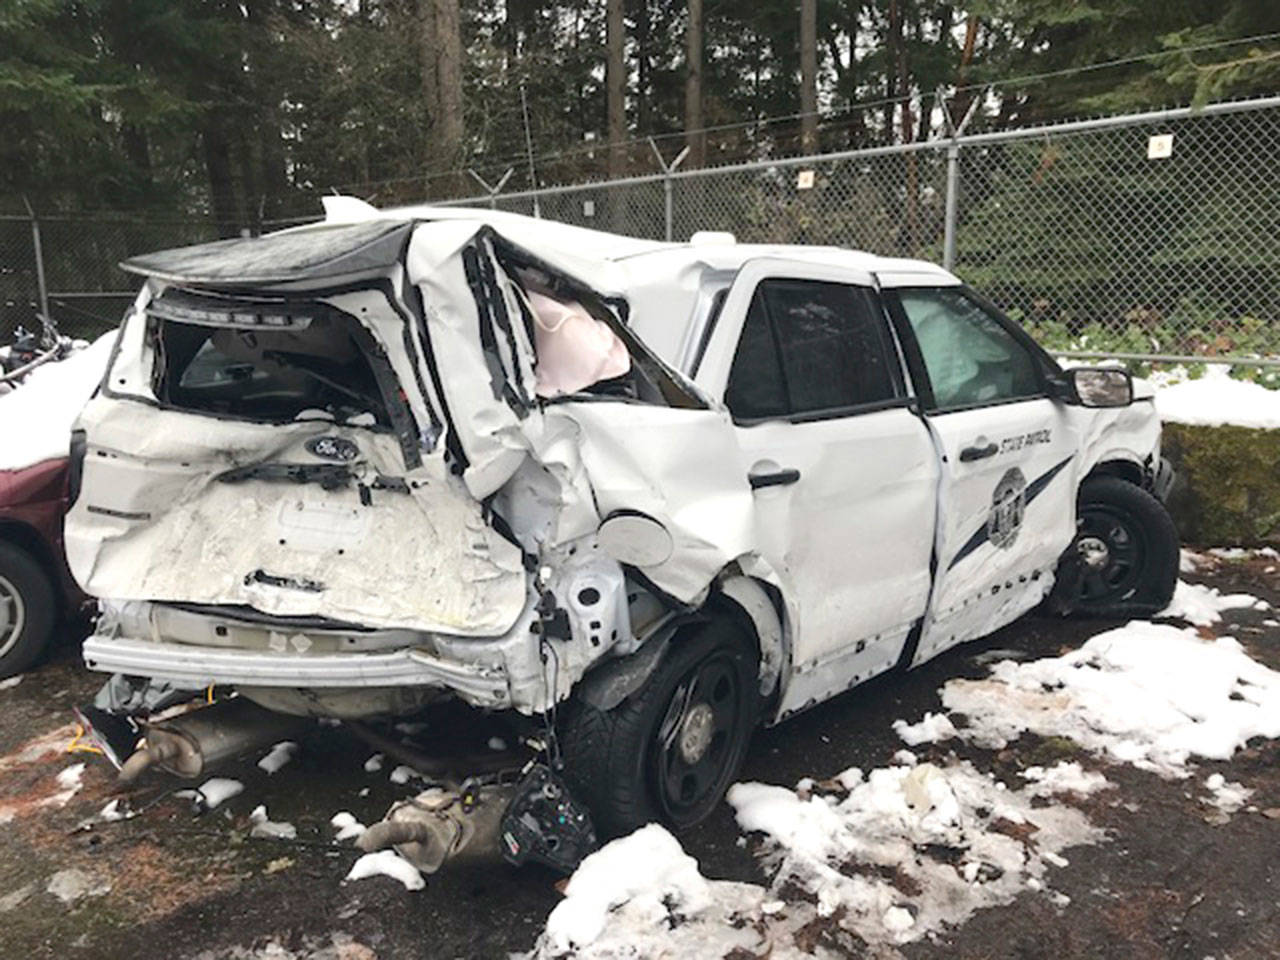 A distracted driver struck Washington State Patrol Trooper Michael Patoc’s vehicle while he was helping a disabled motorist blocking a lane of eastbound Interstate 90 on Tuesday night in Bellevue. (Photo courtesy of the Washington State Patrol)